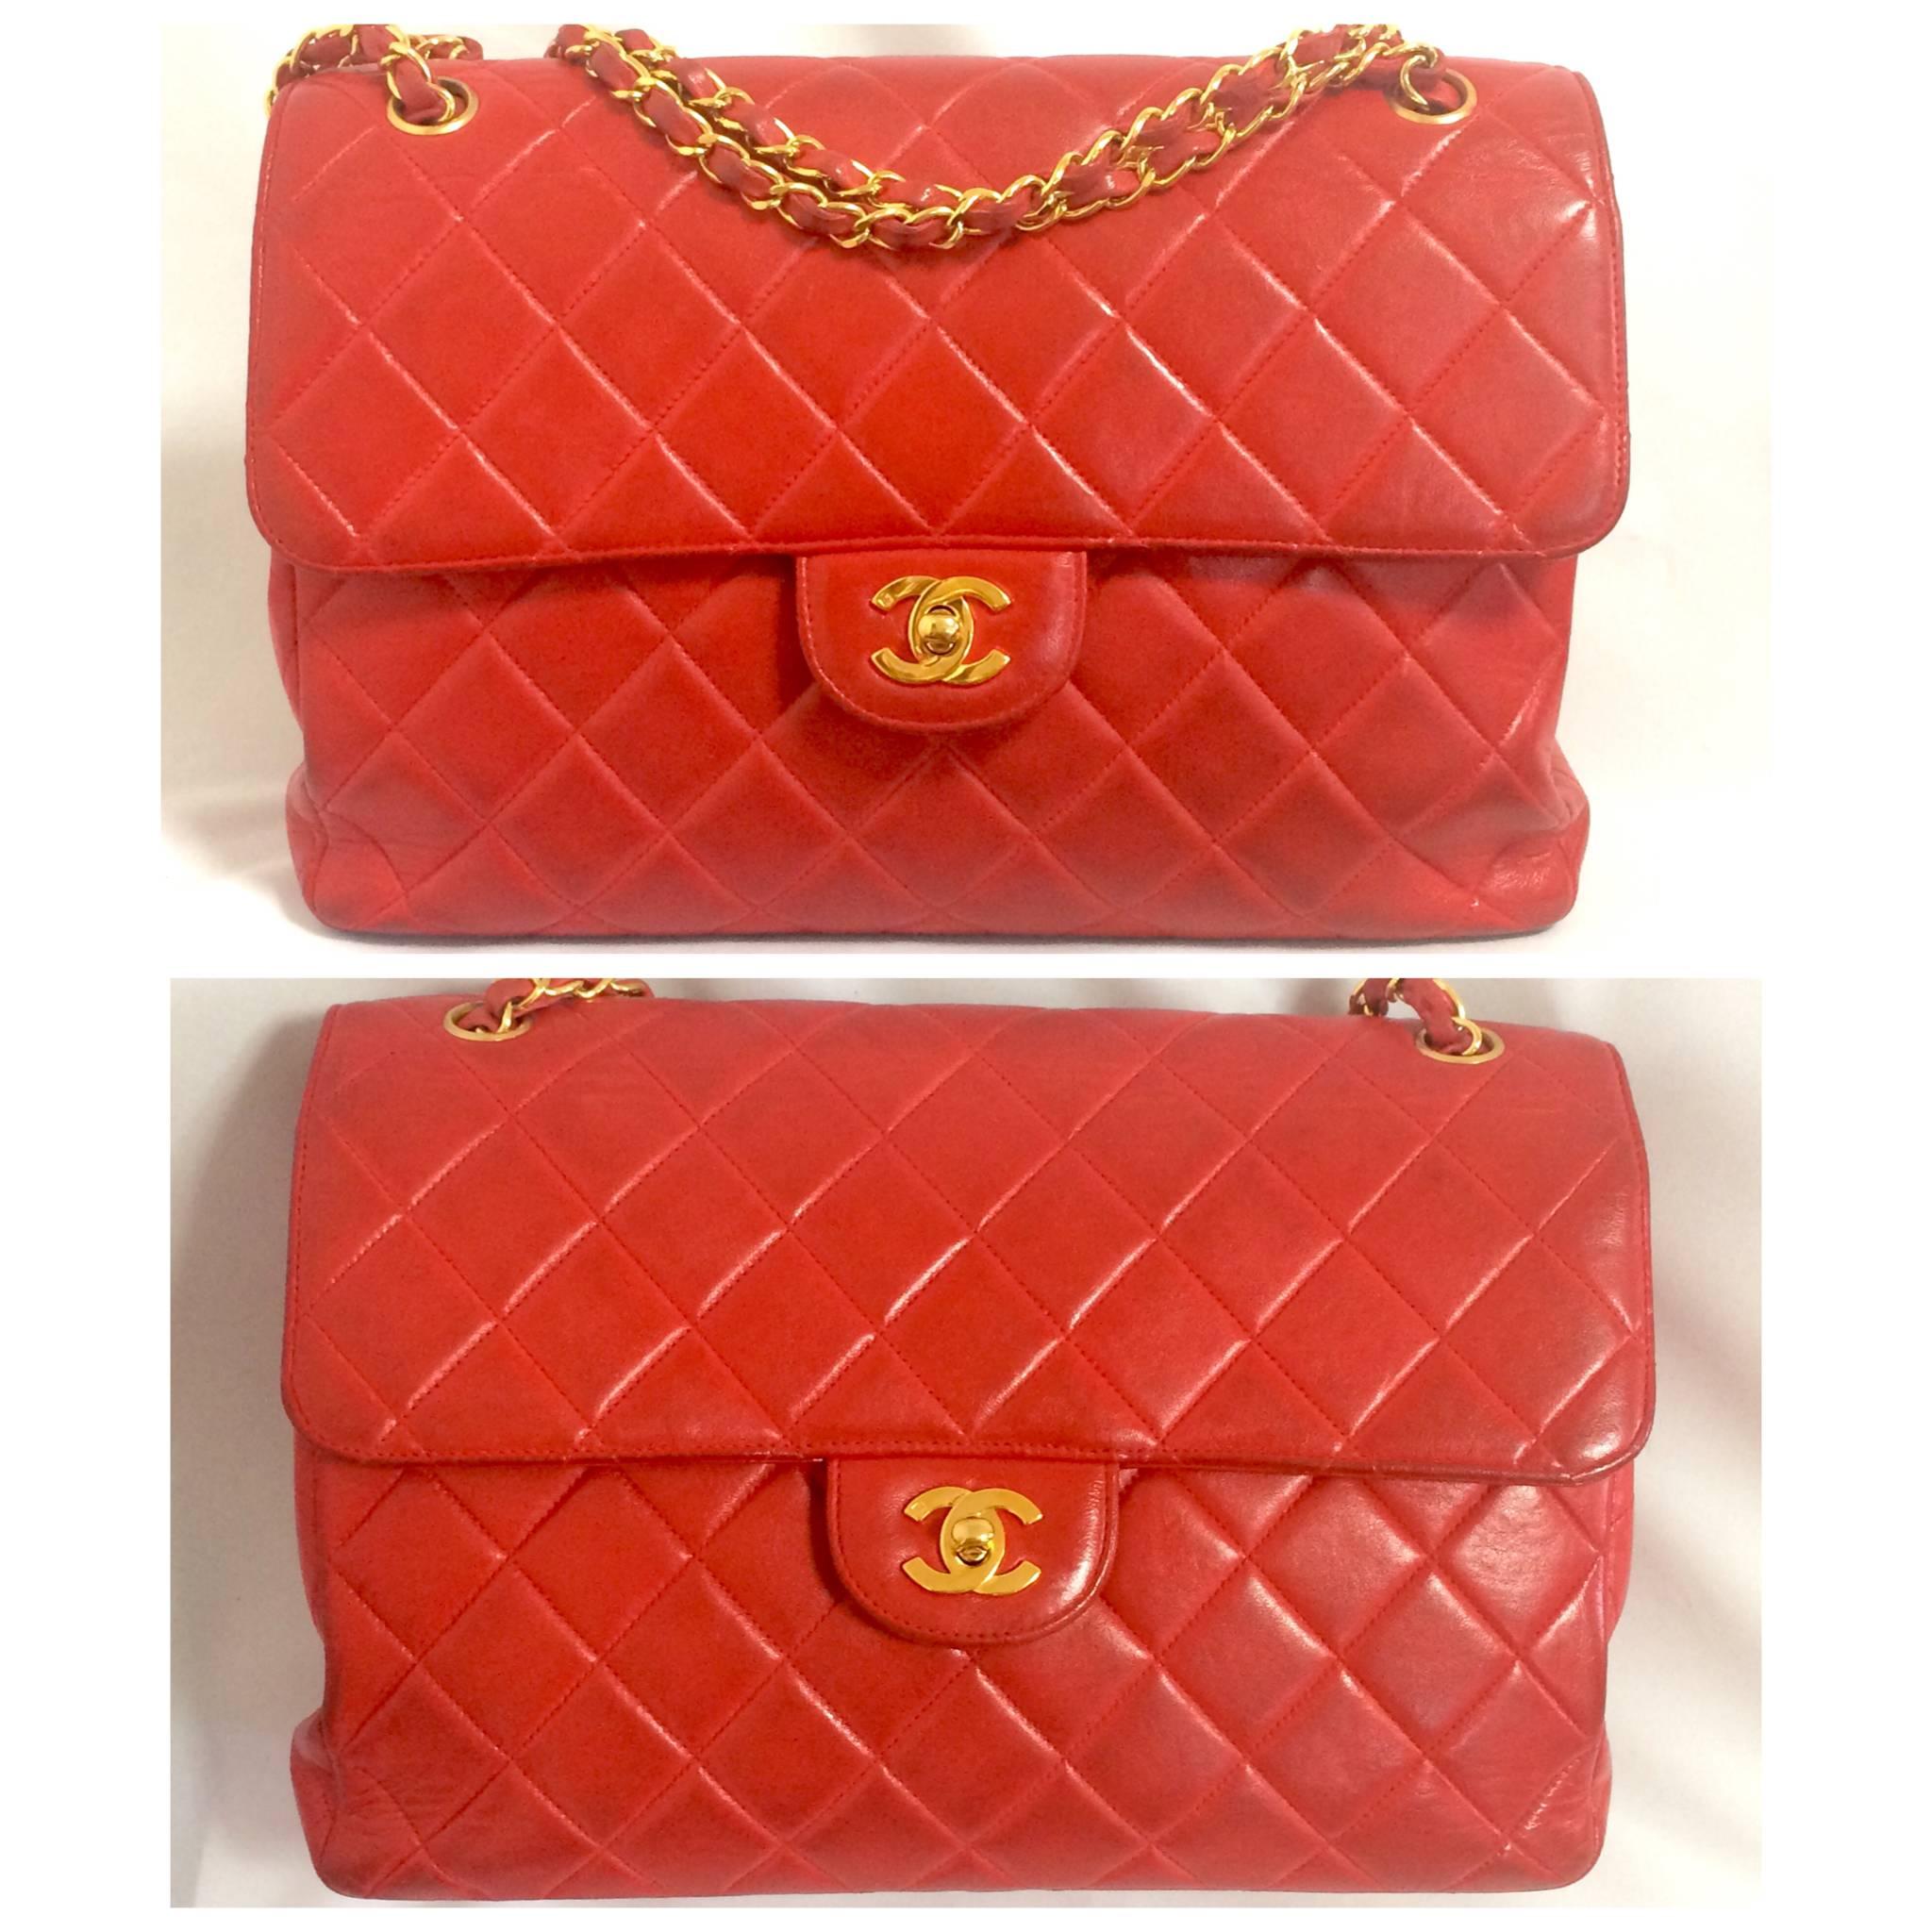 1990s. Vintage CHANEL lipstick red lambskin 2.55 classic jumbo, large shoulder bag with double side flap and golden CC closures. Must have.

Introducing one of the rarest and most classic style bags from CHANEL back in the 90's.

Red jumbo/large